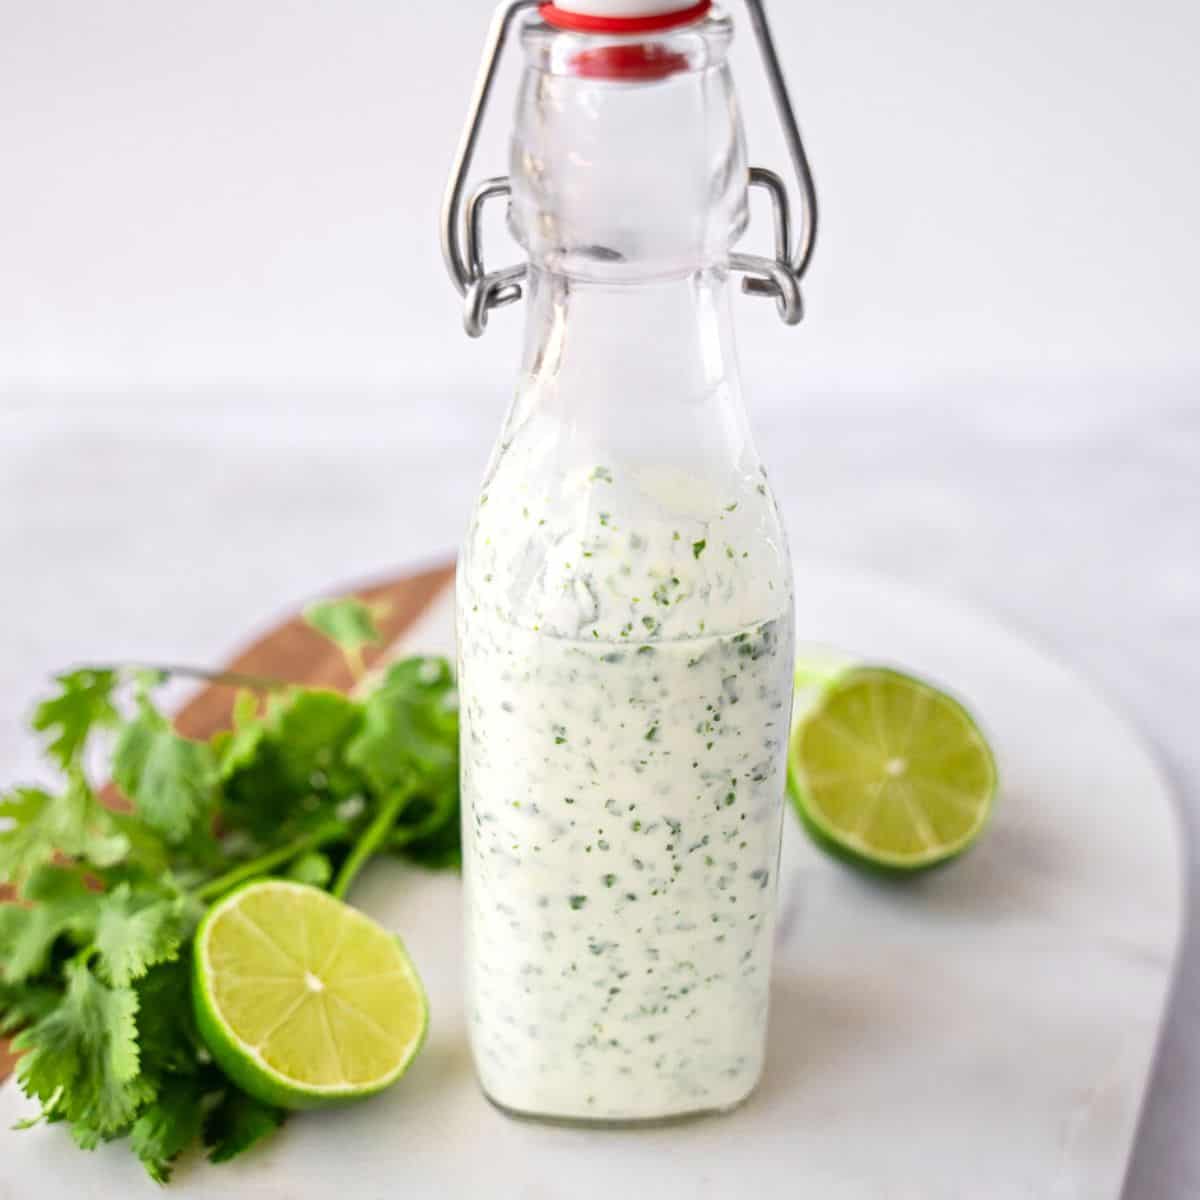 Feature image of dressing in a glass bottle.